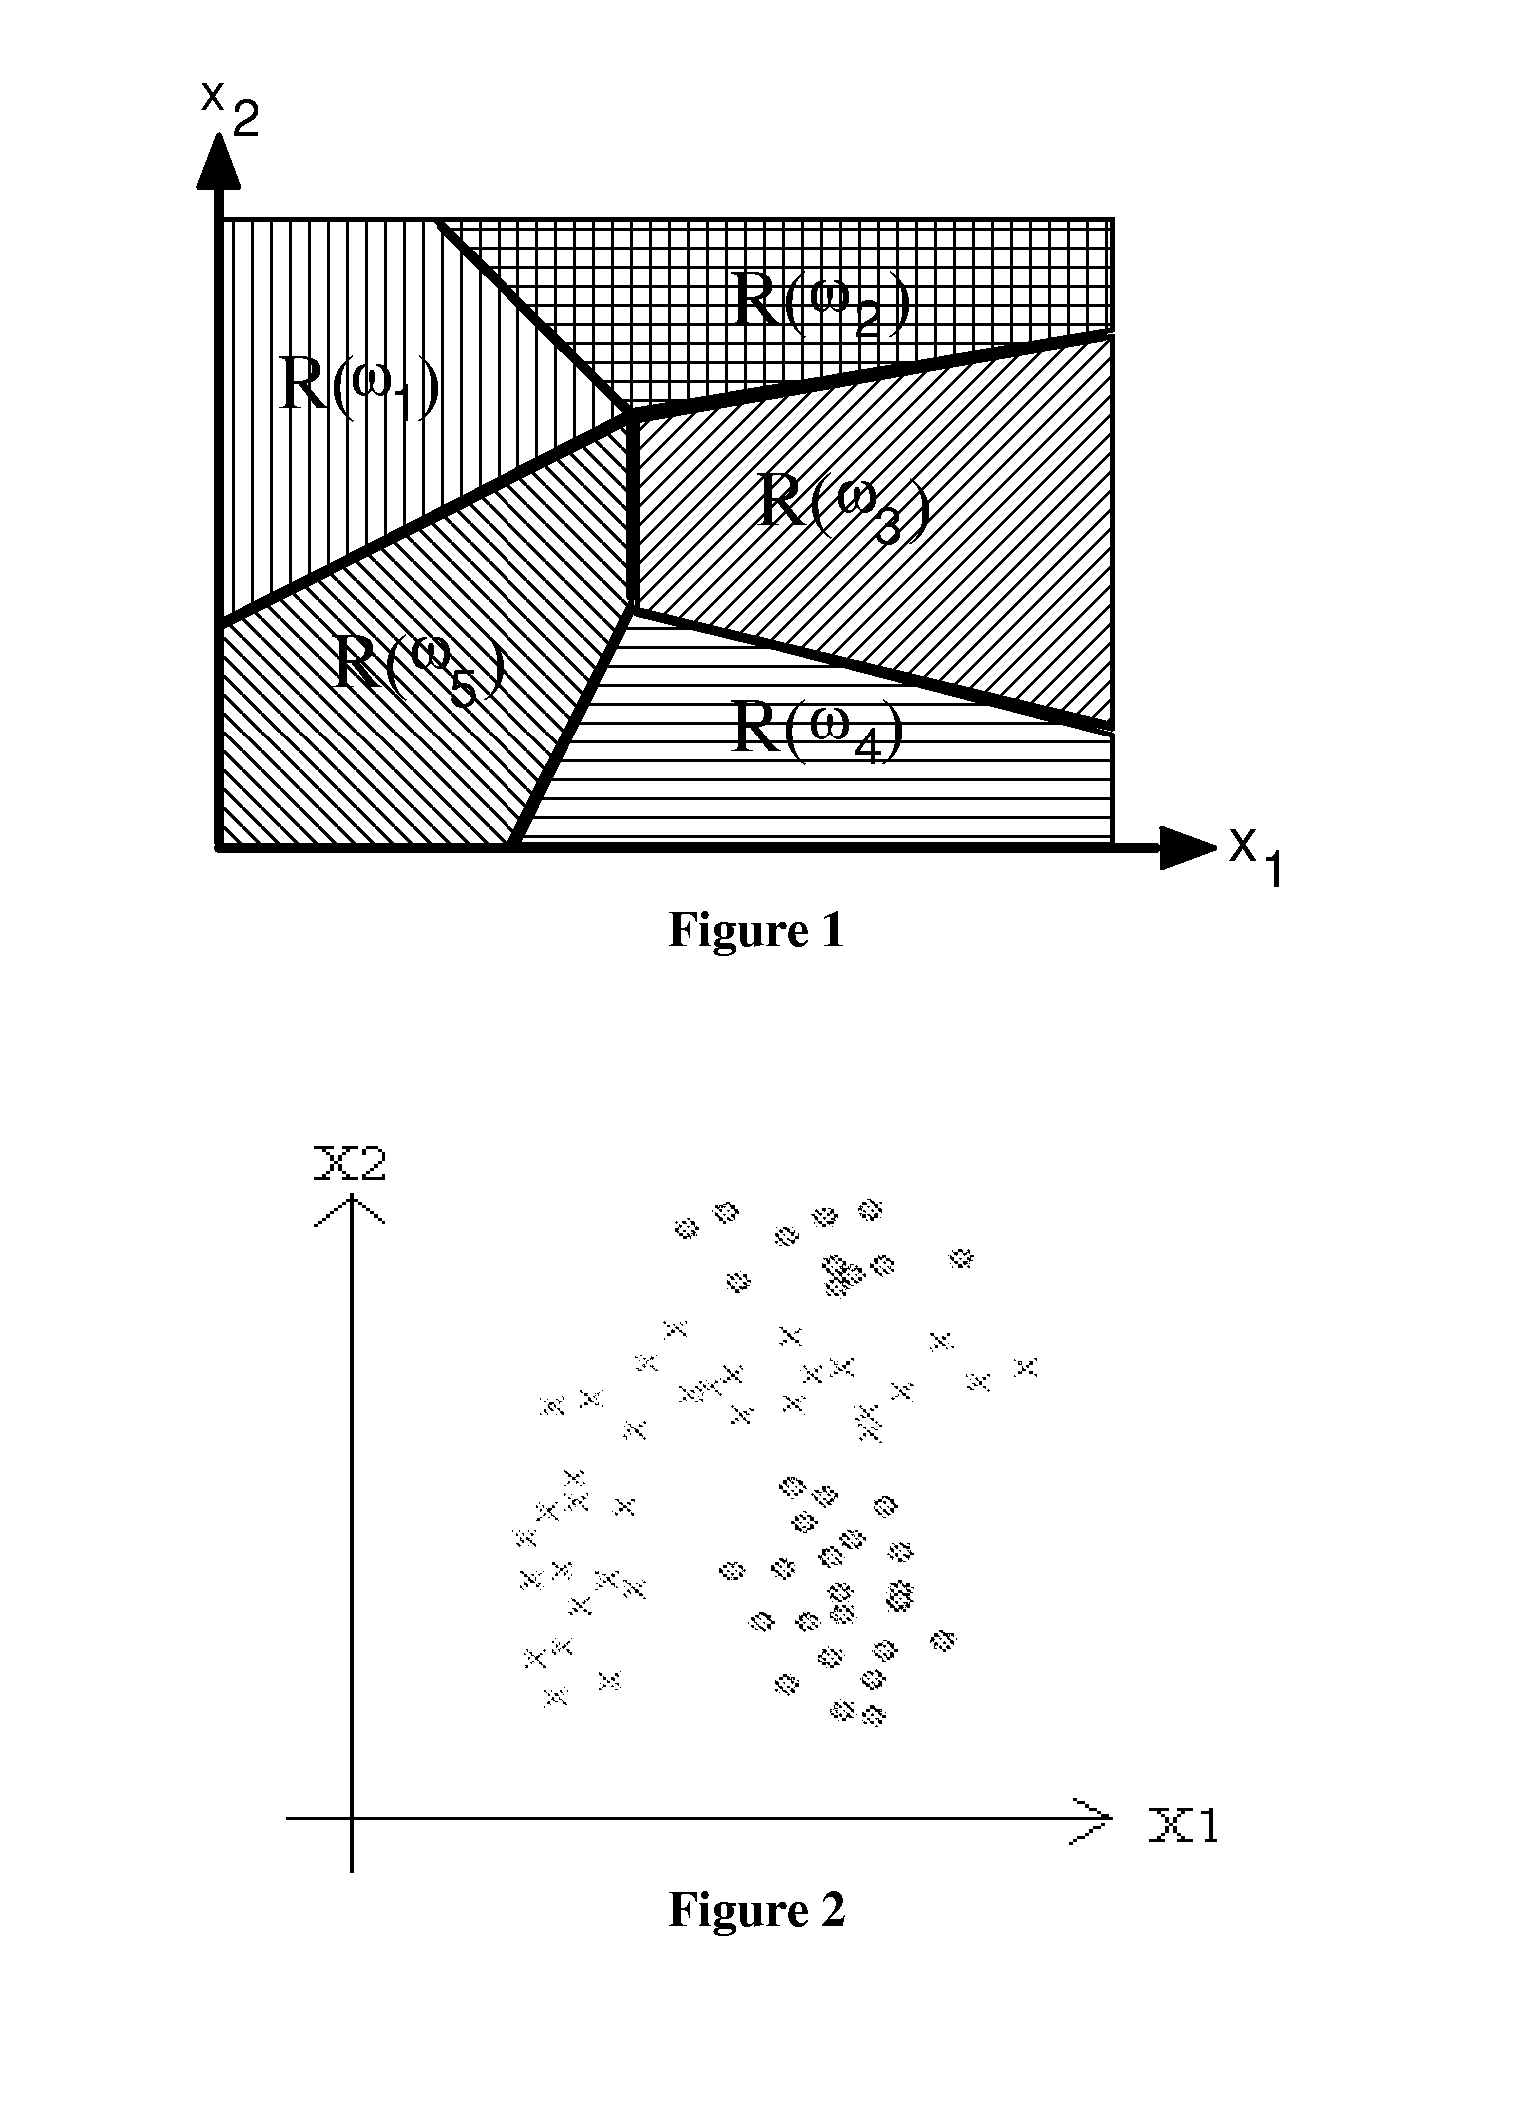 Apparatus and method for organization, segmentation, characterization, and discrimination of complex data sets from multi-heterogeneous sources